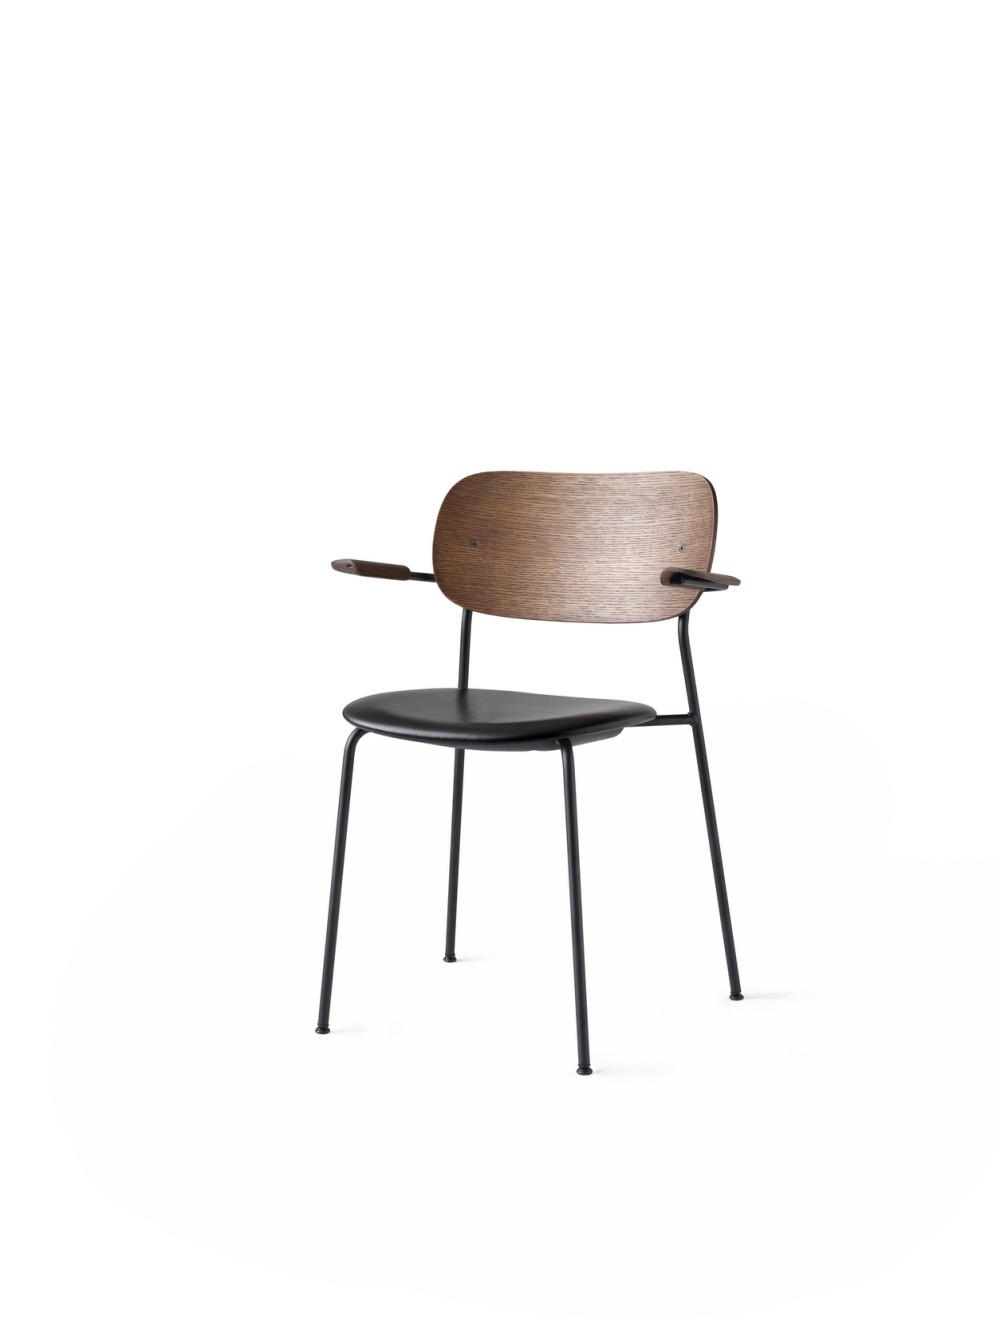 Menu Co Chair Dining Chair Black Steel Base Leather Dakar Seat and Back Dark Stained Oak Esszimmerstuhl